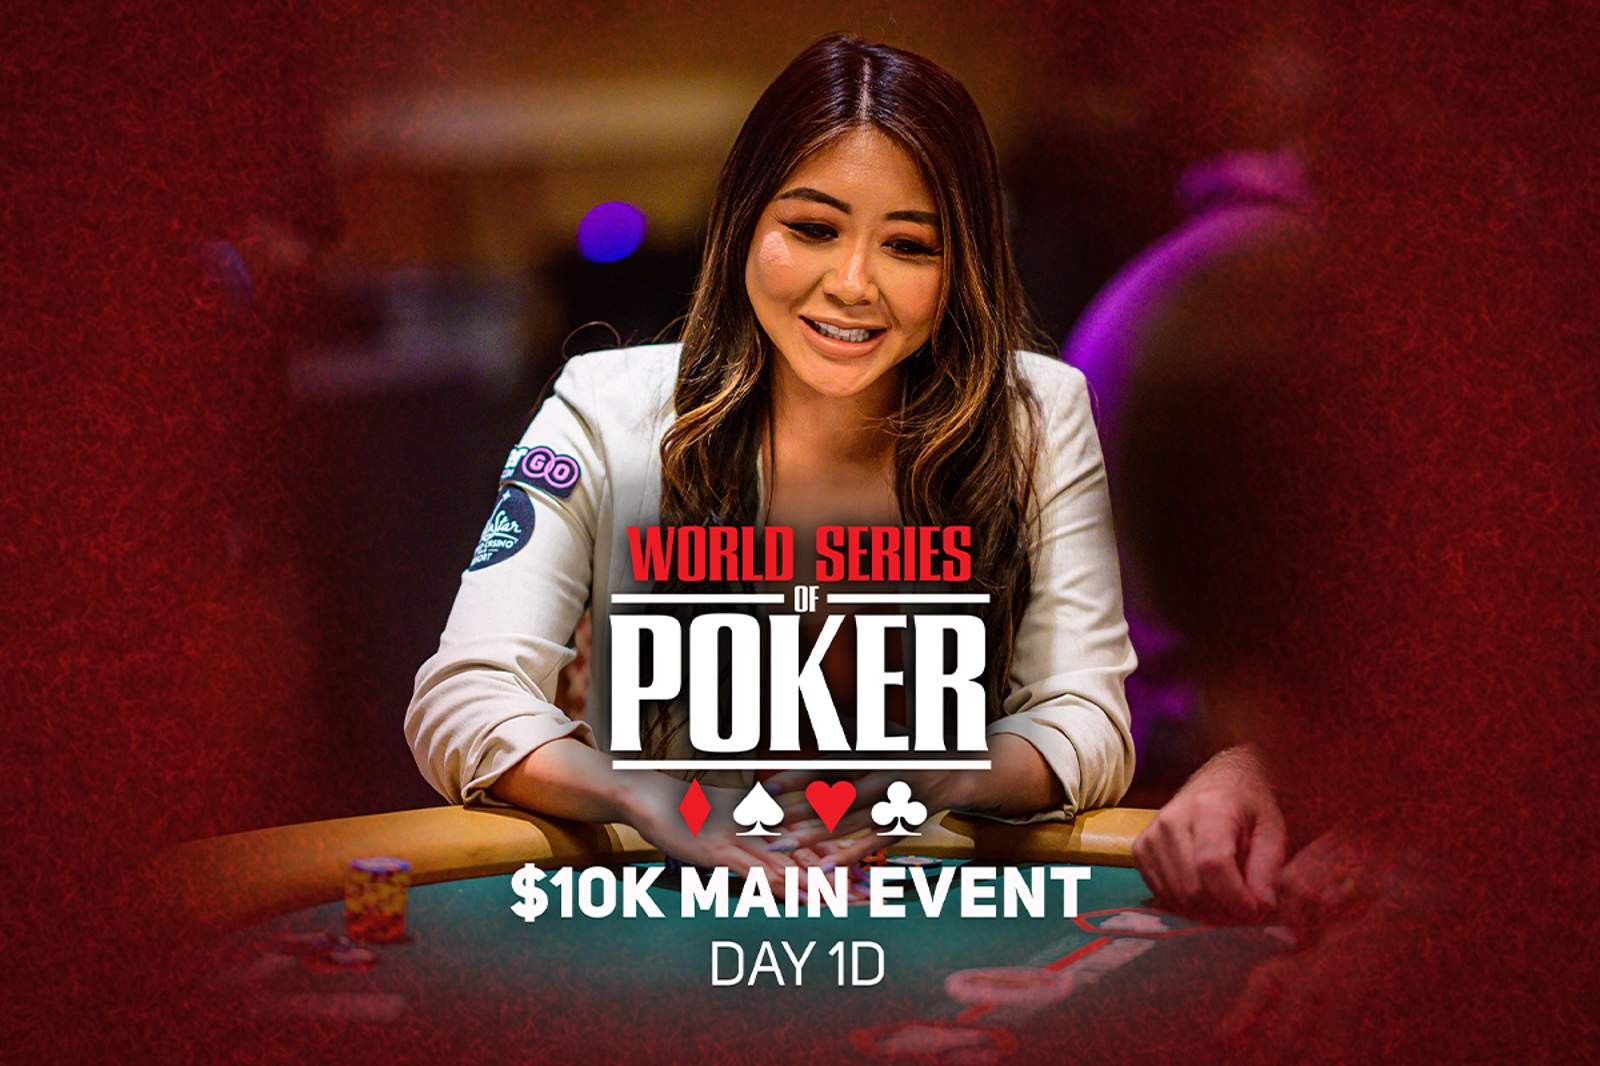 Watch Day 1D of the 2021 WSOP Main Event Live On PokerGO.com at 7:30 p.m. ET